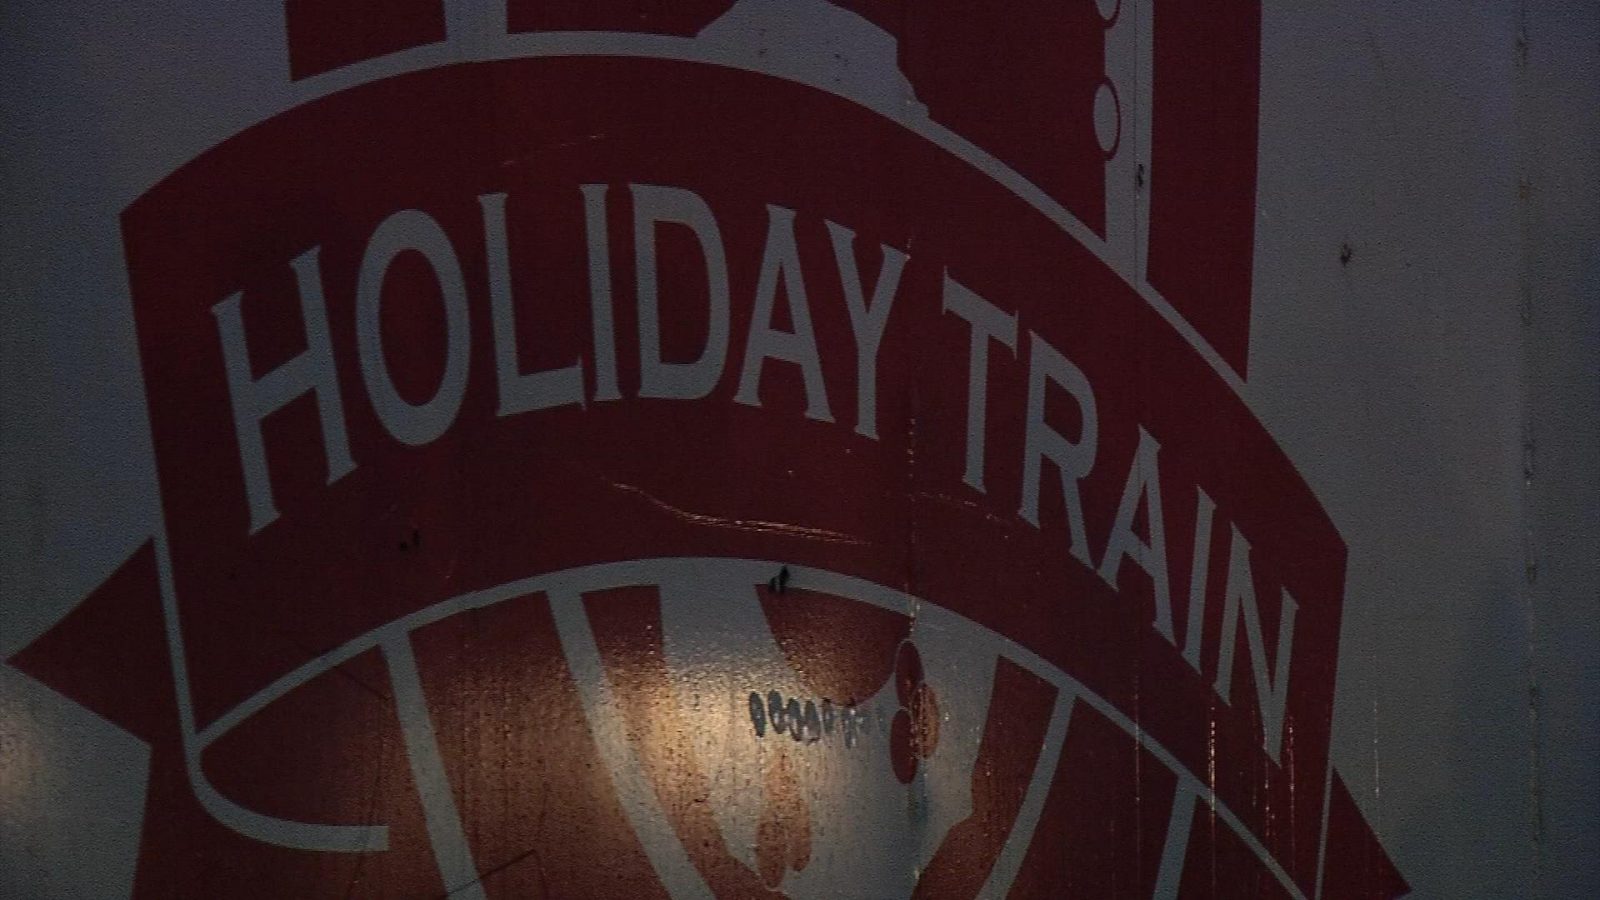 Canadian Pacific Holiday Train Attracts Crowds